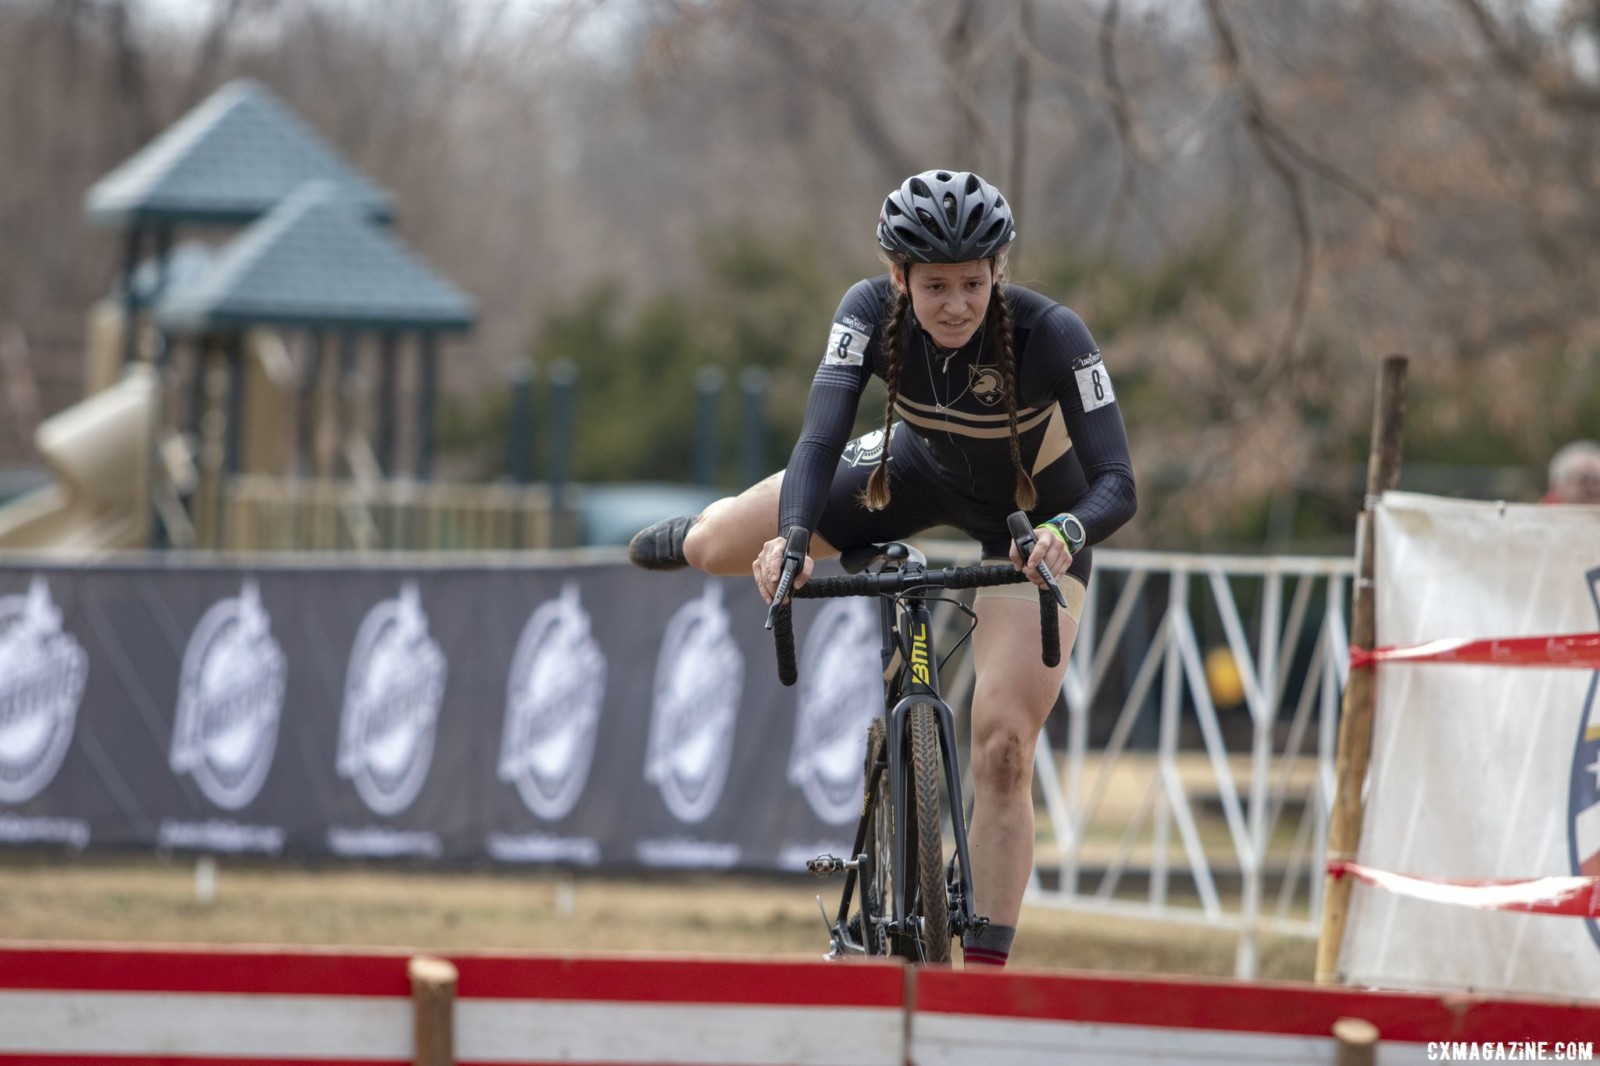 Huuki came to the final barrier alone, 1:19 behind Ginsbach. Collegiate Club Women. 2018 Cyclocross National Championships, Louisville, KY. © A. Yee / Cyclocross Magazine